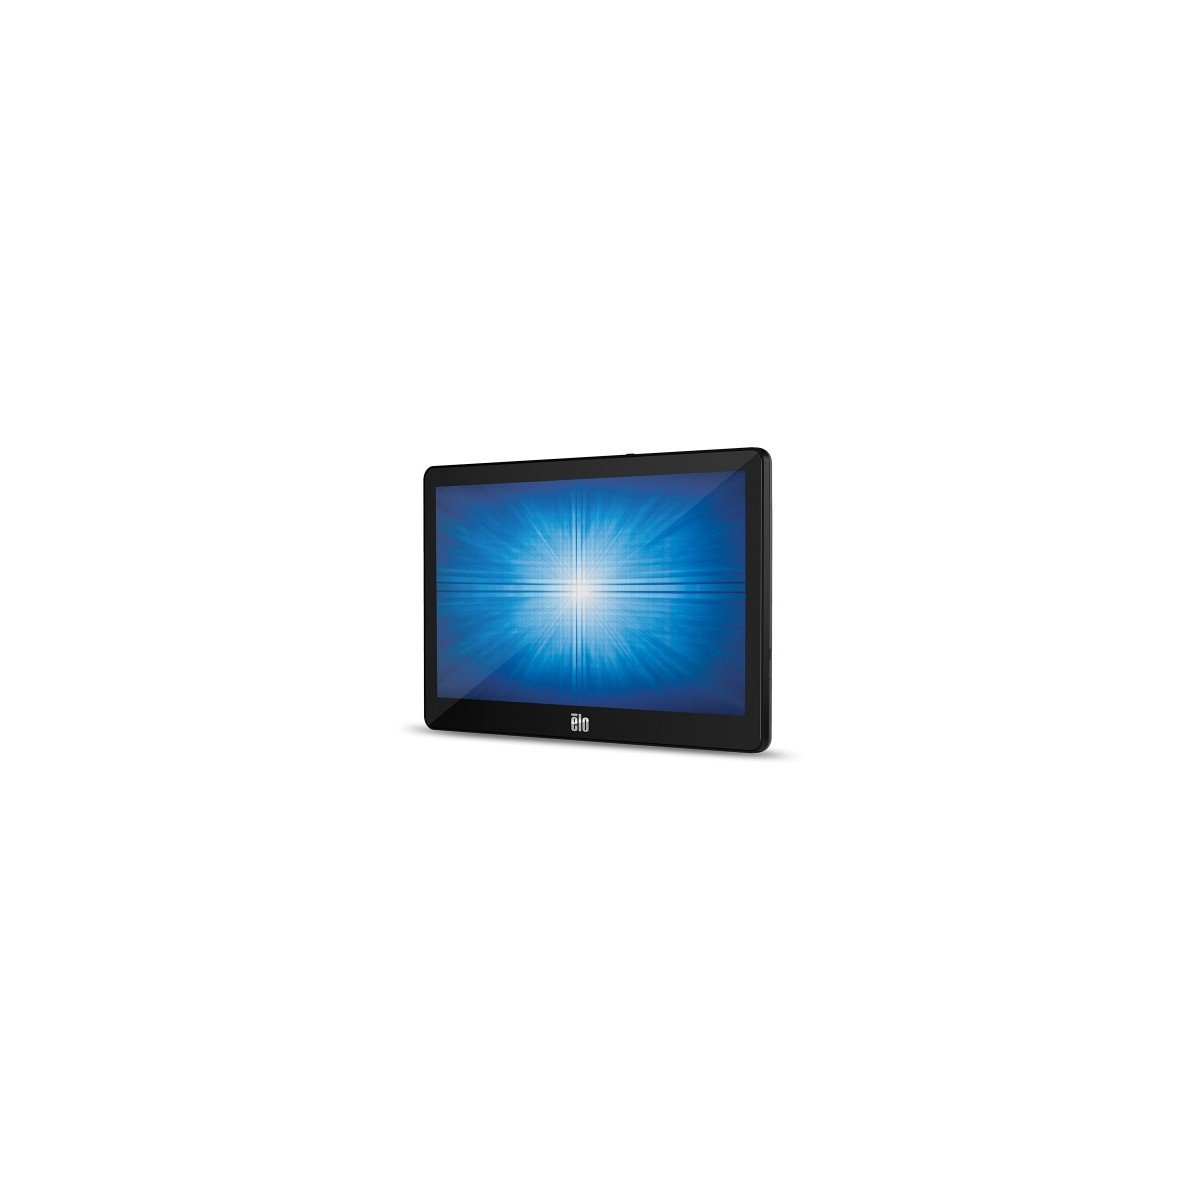 Elo Touch Solutions Elo Touch Solution 1302L - 33.8 cm (13.3) - 300 cd/m² - Full HD - LCD/TFT - 25 ms - 800:1